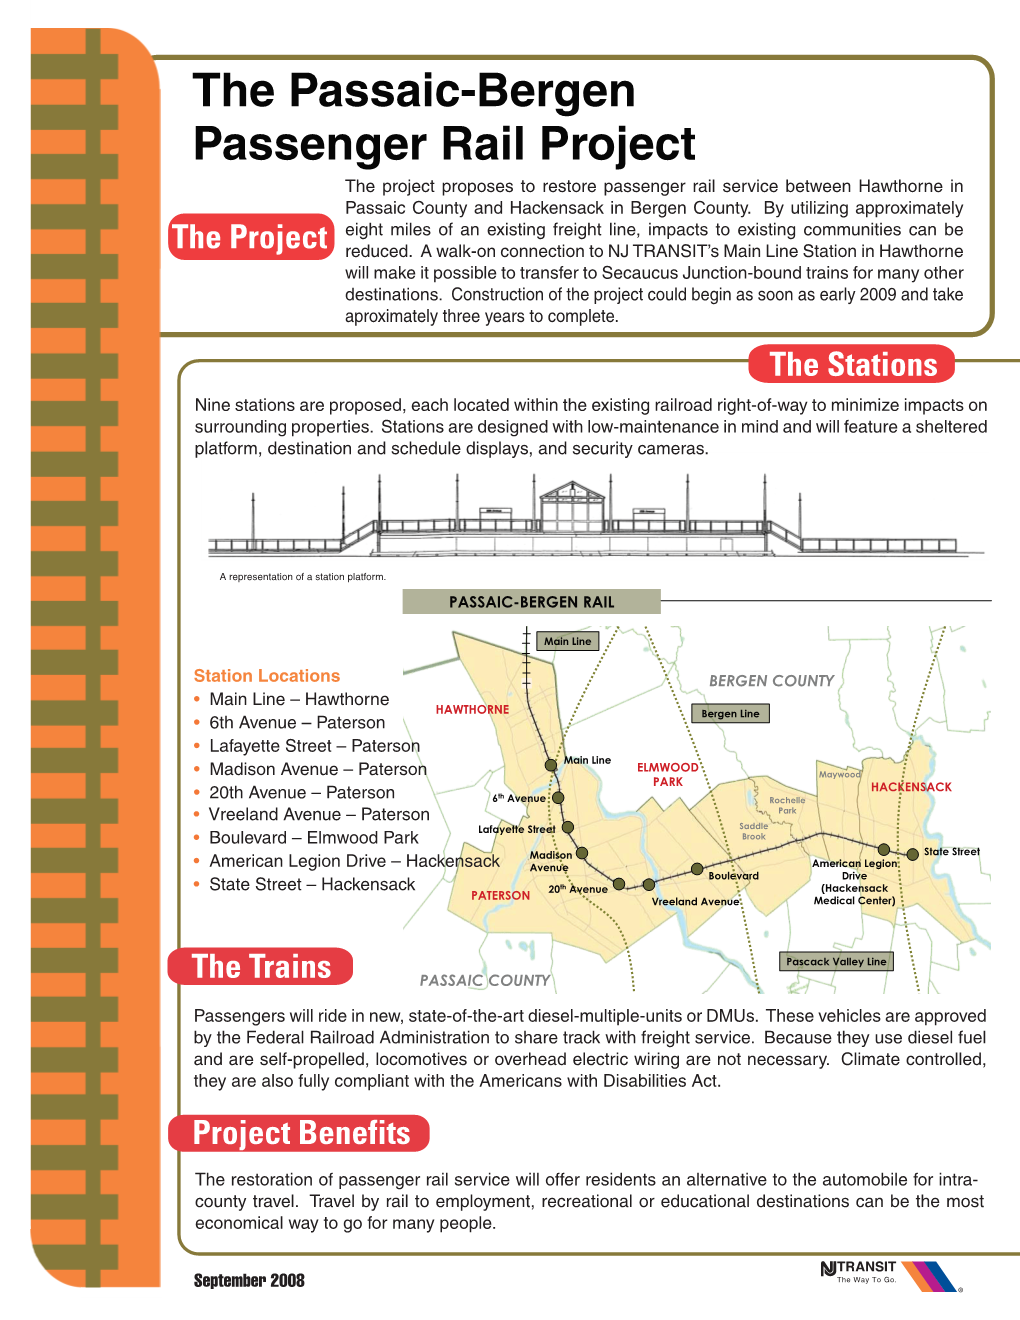 The Passaic-Bergen Passenger Rail Project the Project Proposes to Restore Passenger Rail Service Between Hawthorne in Passaic County and Hackensack in Bergen County